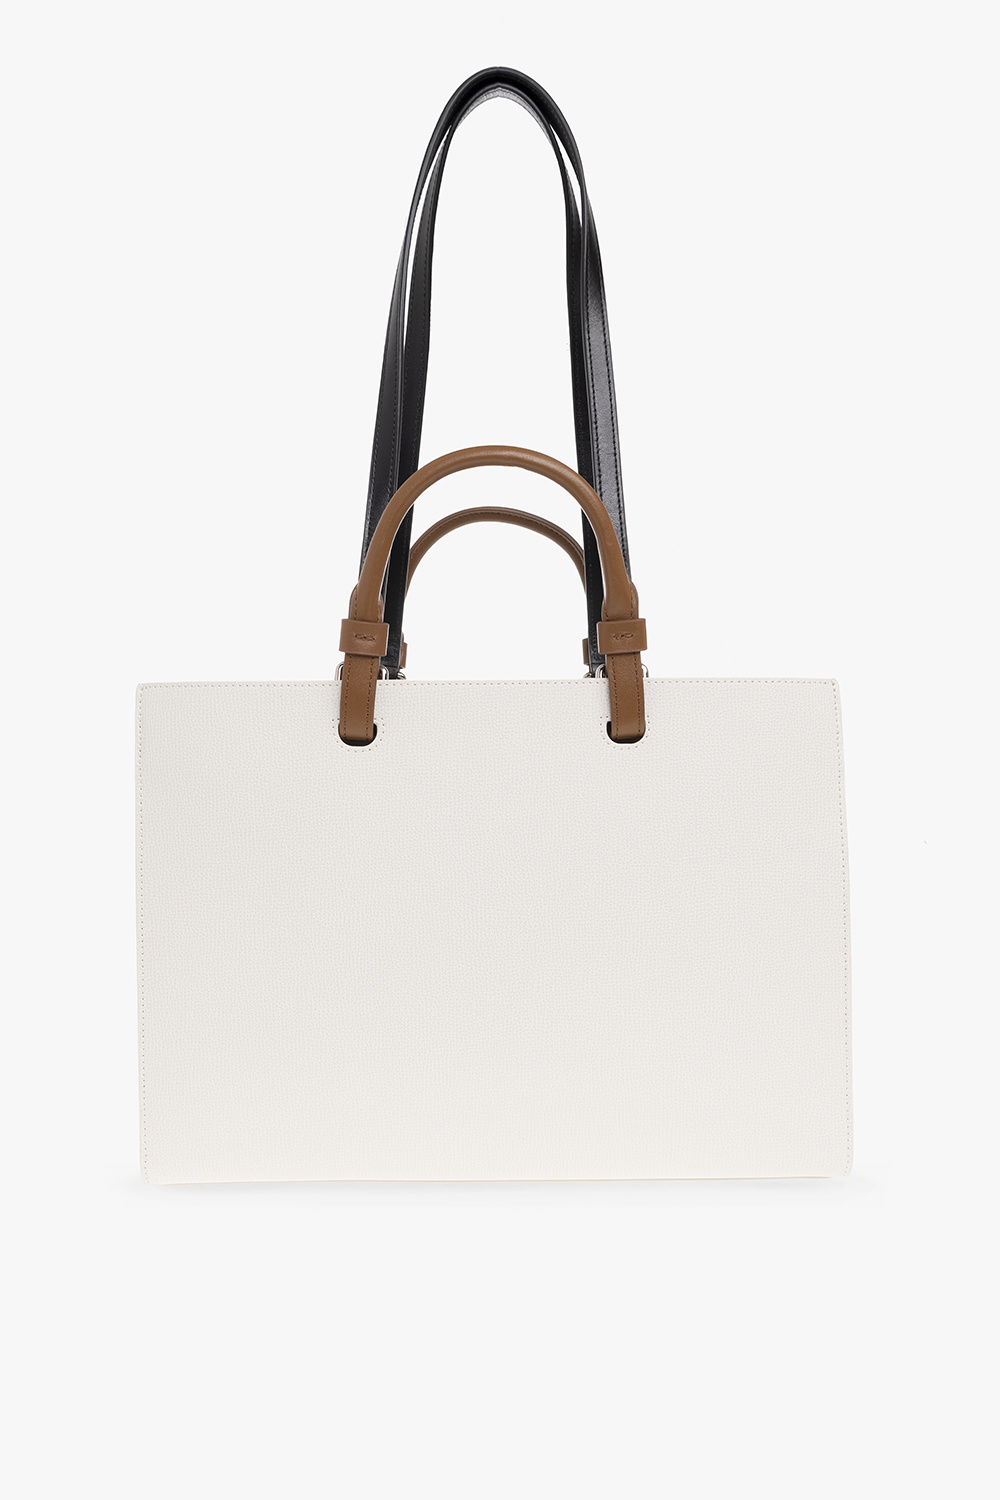 Valentino Frosty RE Faux Leather Tote Bag